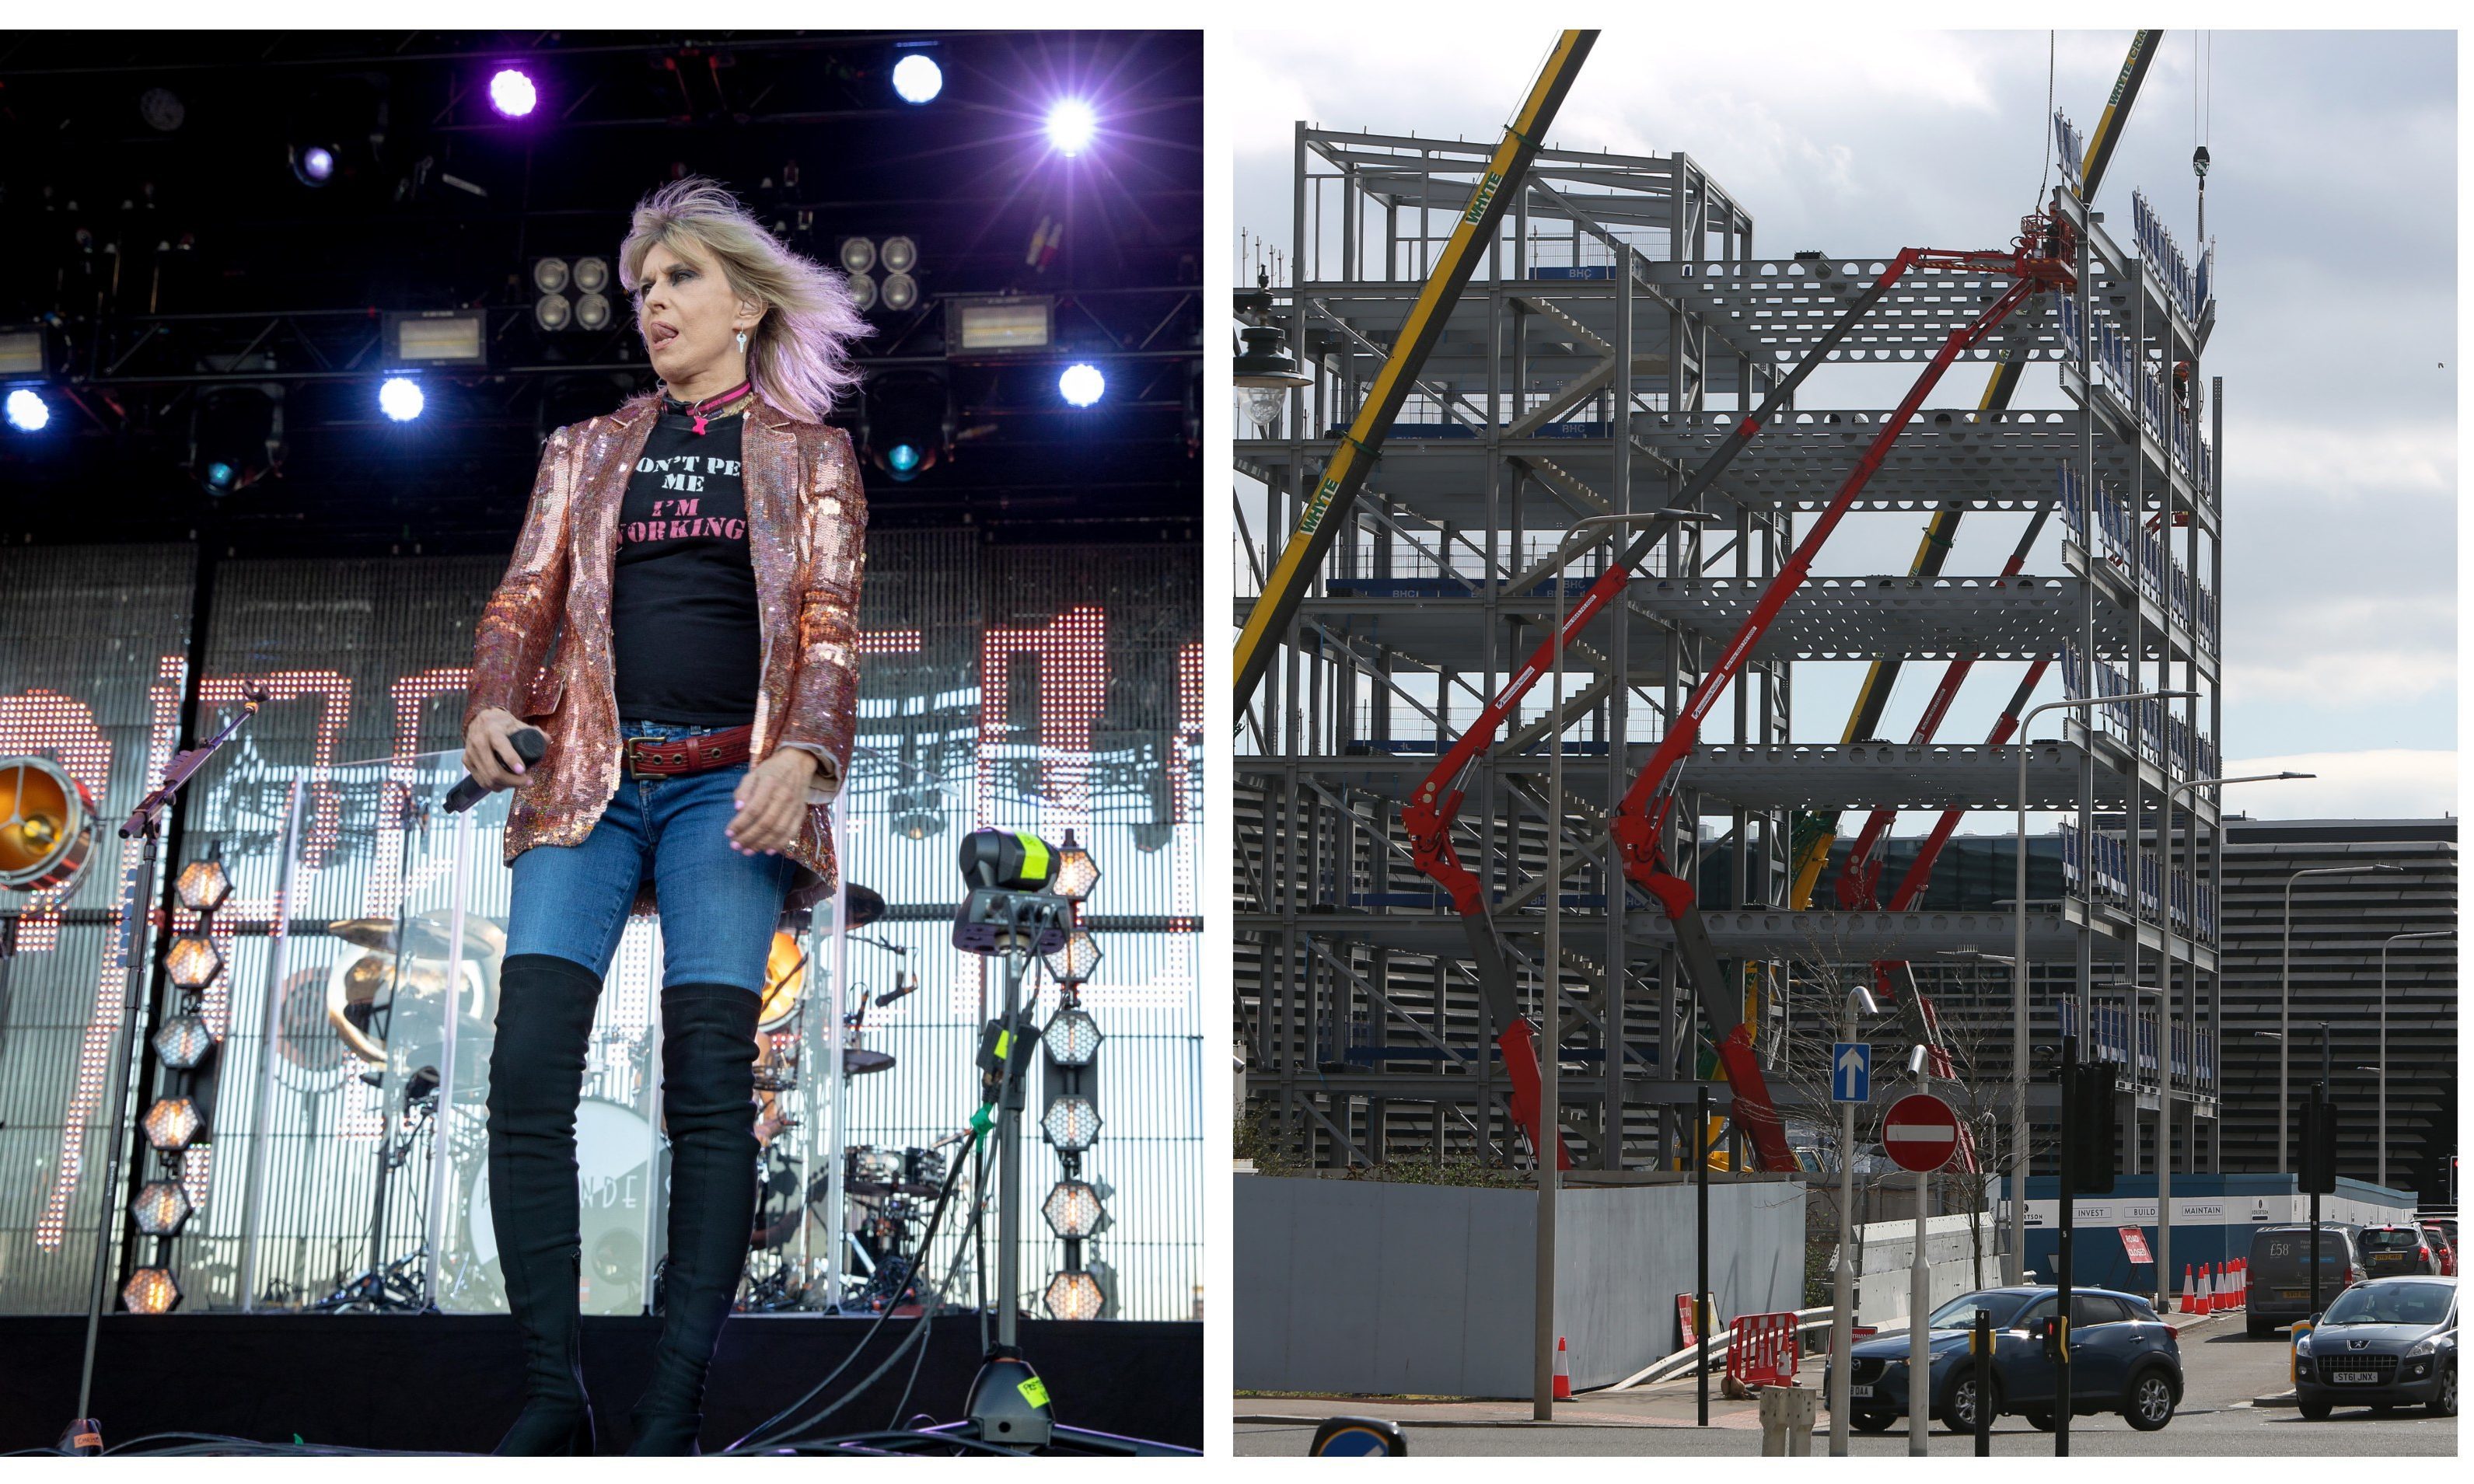 Pretenders singer Chrissie Hynde on stage at Slessor Gardens/the controversial office block.